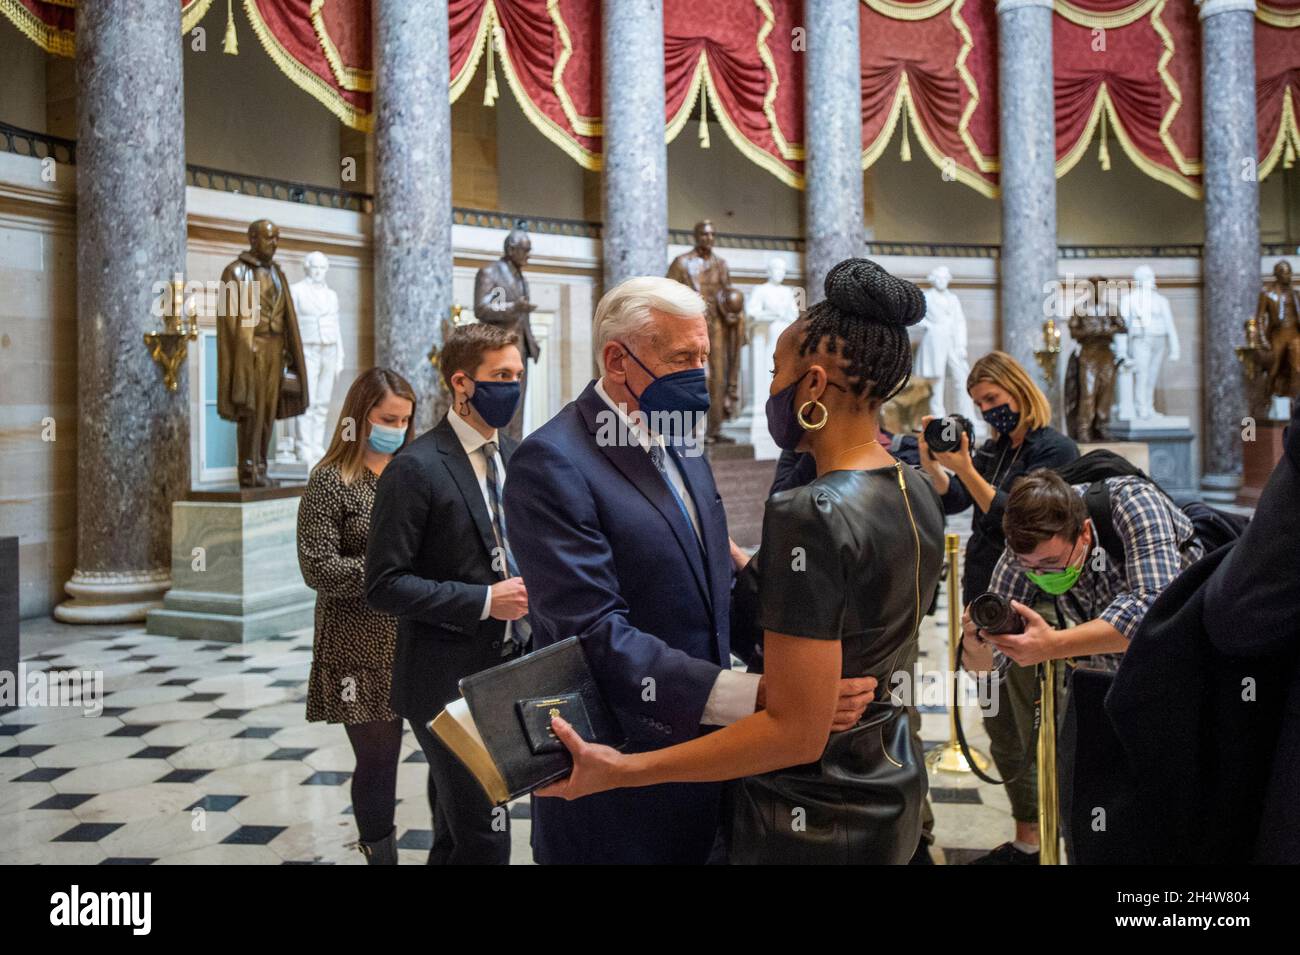 United States Representative Shontel Brown (Democrat of Ohio), right, is greeted by United States House Majority Leader Steny Hoyer (Democrat of Maryland), left, after being sworn-in as a member of the Congressional Black Caucus in Statuary Hall at the US Capitol in Washington, DC, Thursday, November 4, 2021. Credit: Rod Lamkey/CNP /MediaPunch Stock Photo